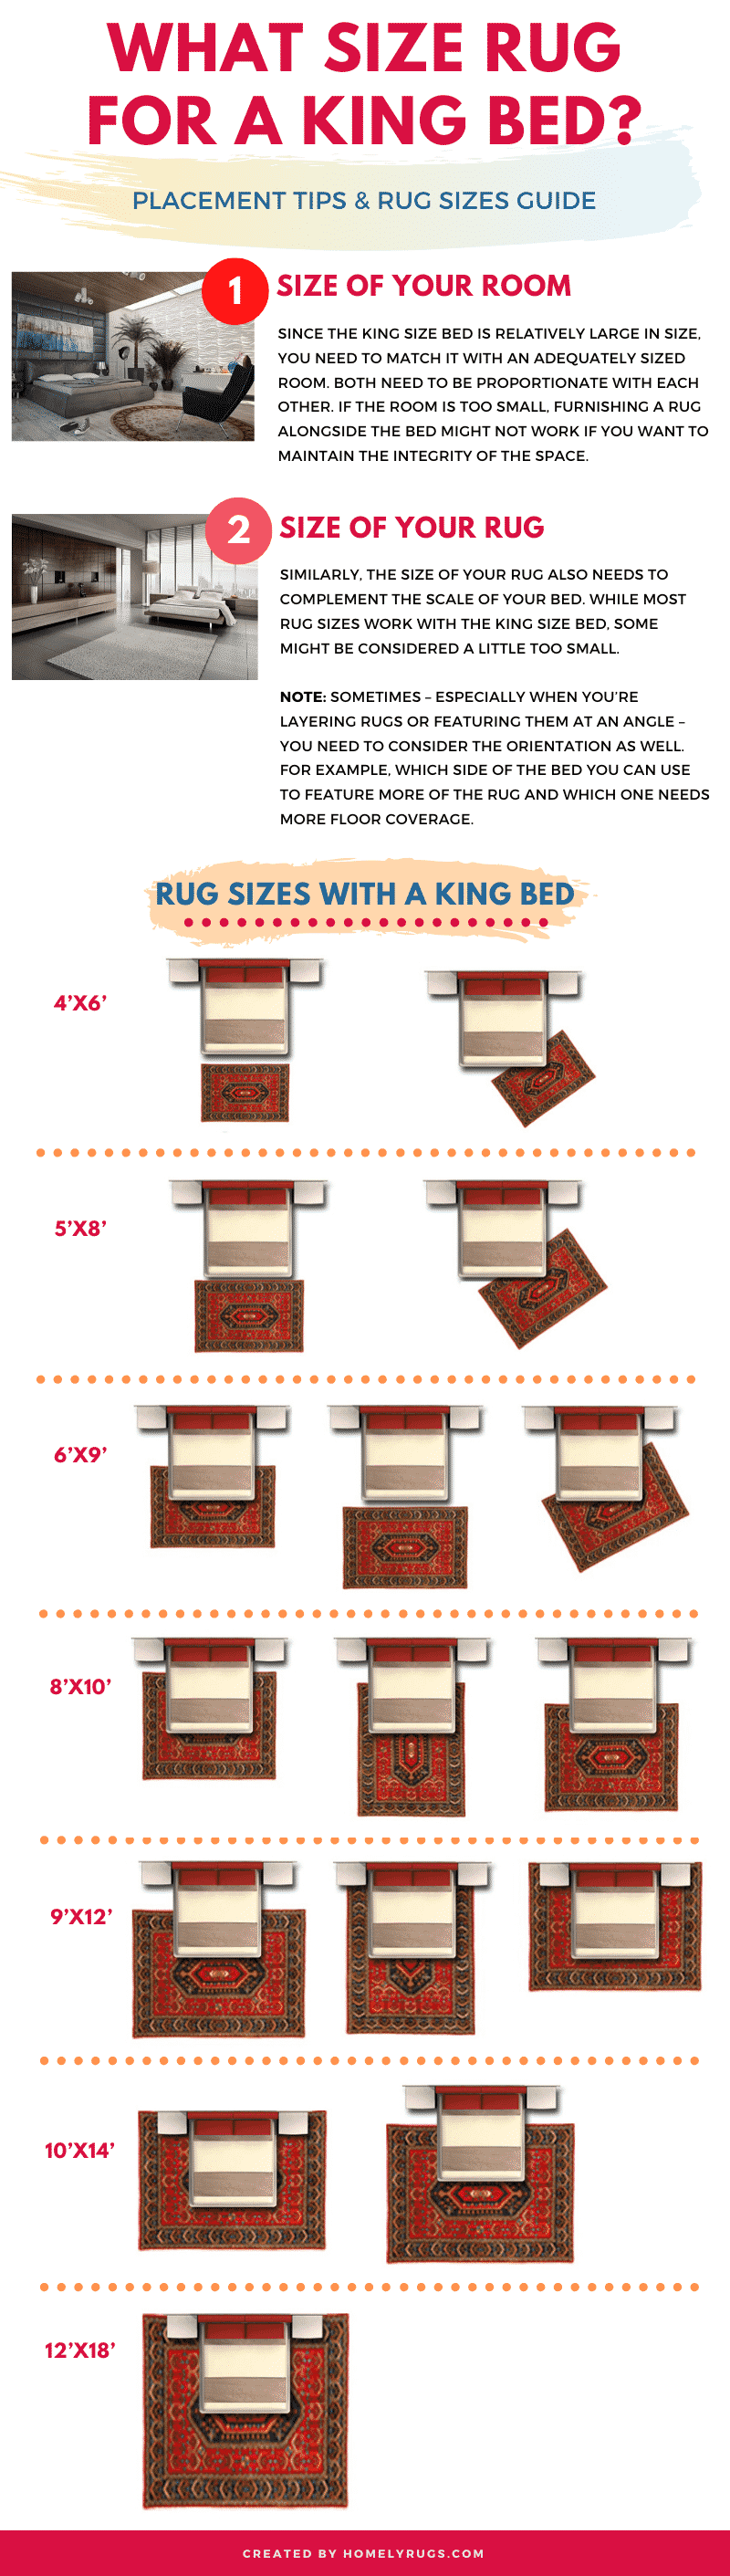 What Size Rug for a King Bed Infographic